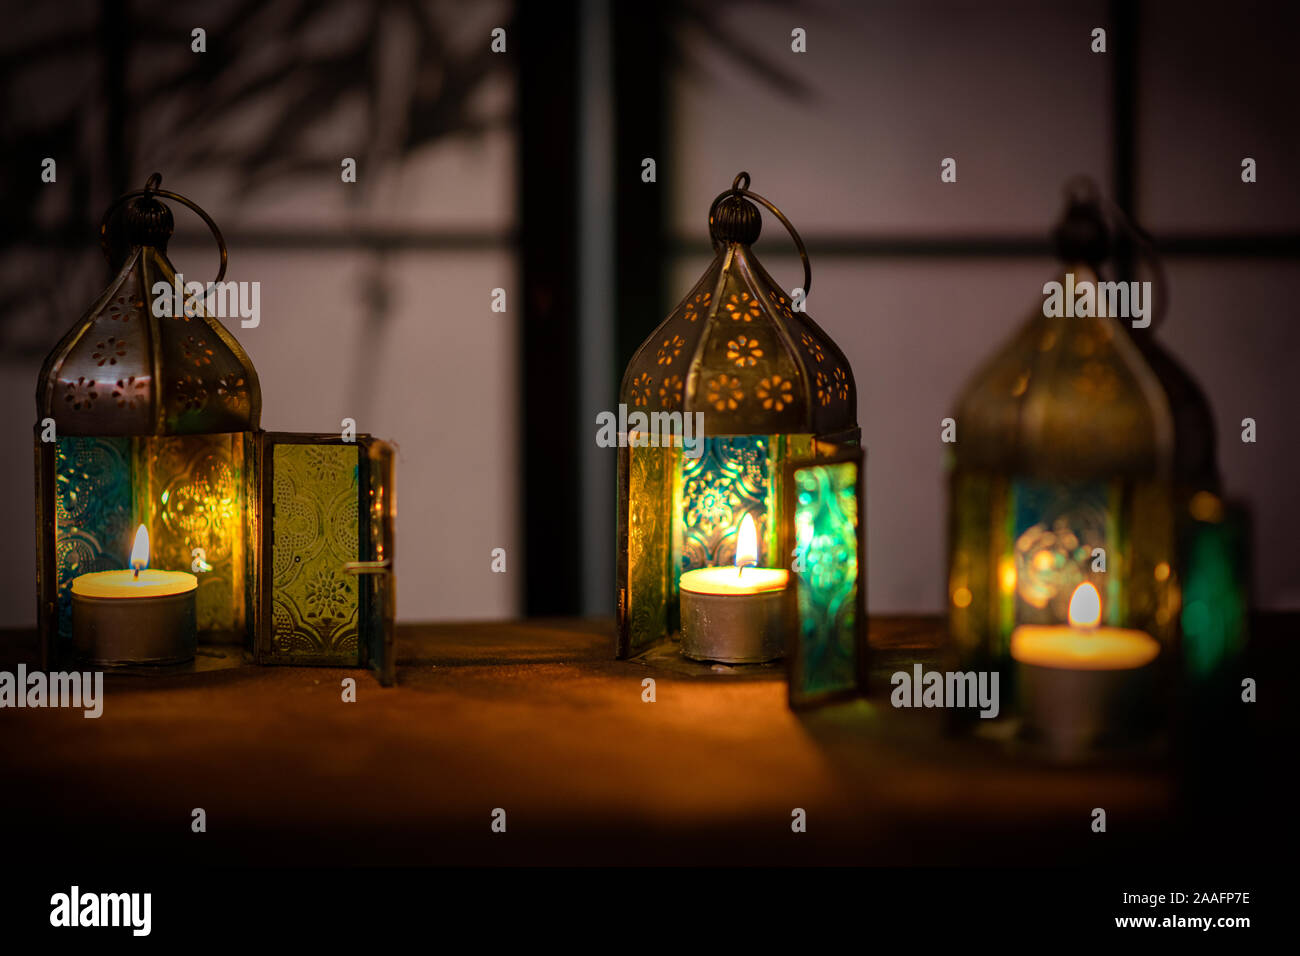 Morroccan lamps with tea lights against a dark background. Stock Photo